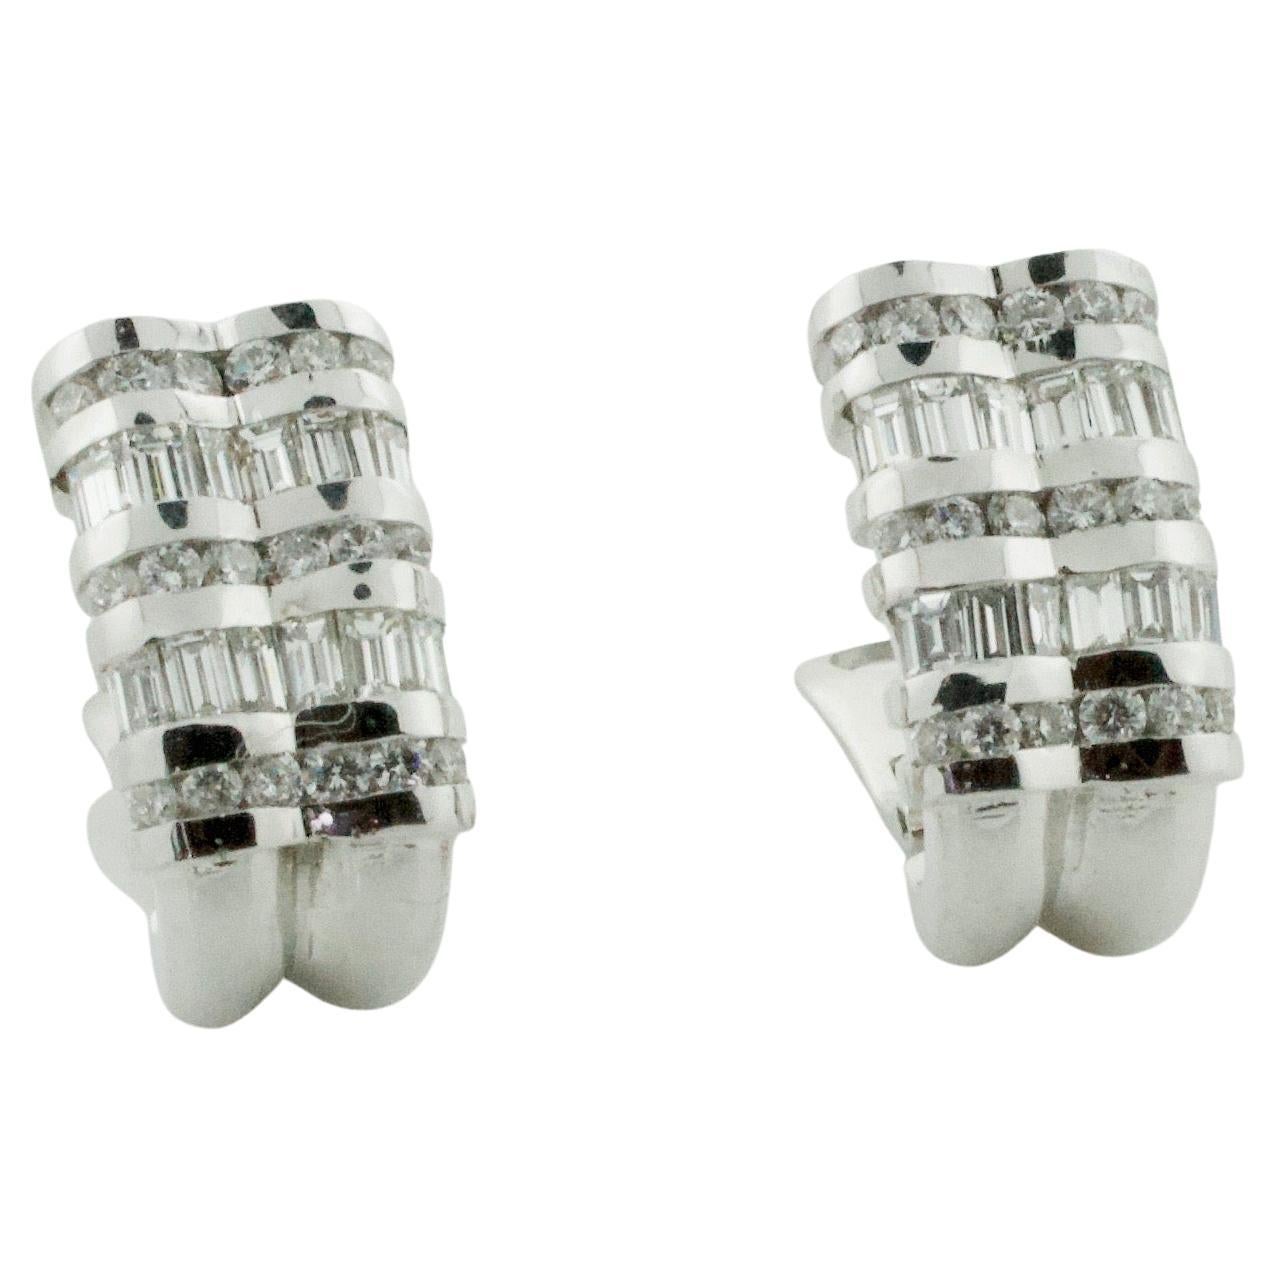 Chanel Set Diamond  Earrings in 18k White Gold 3.45 Carats Total Weight